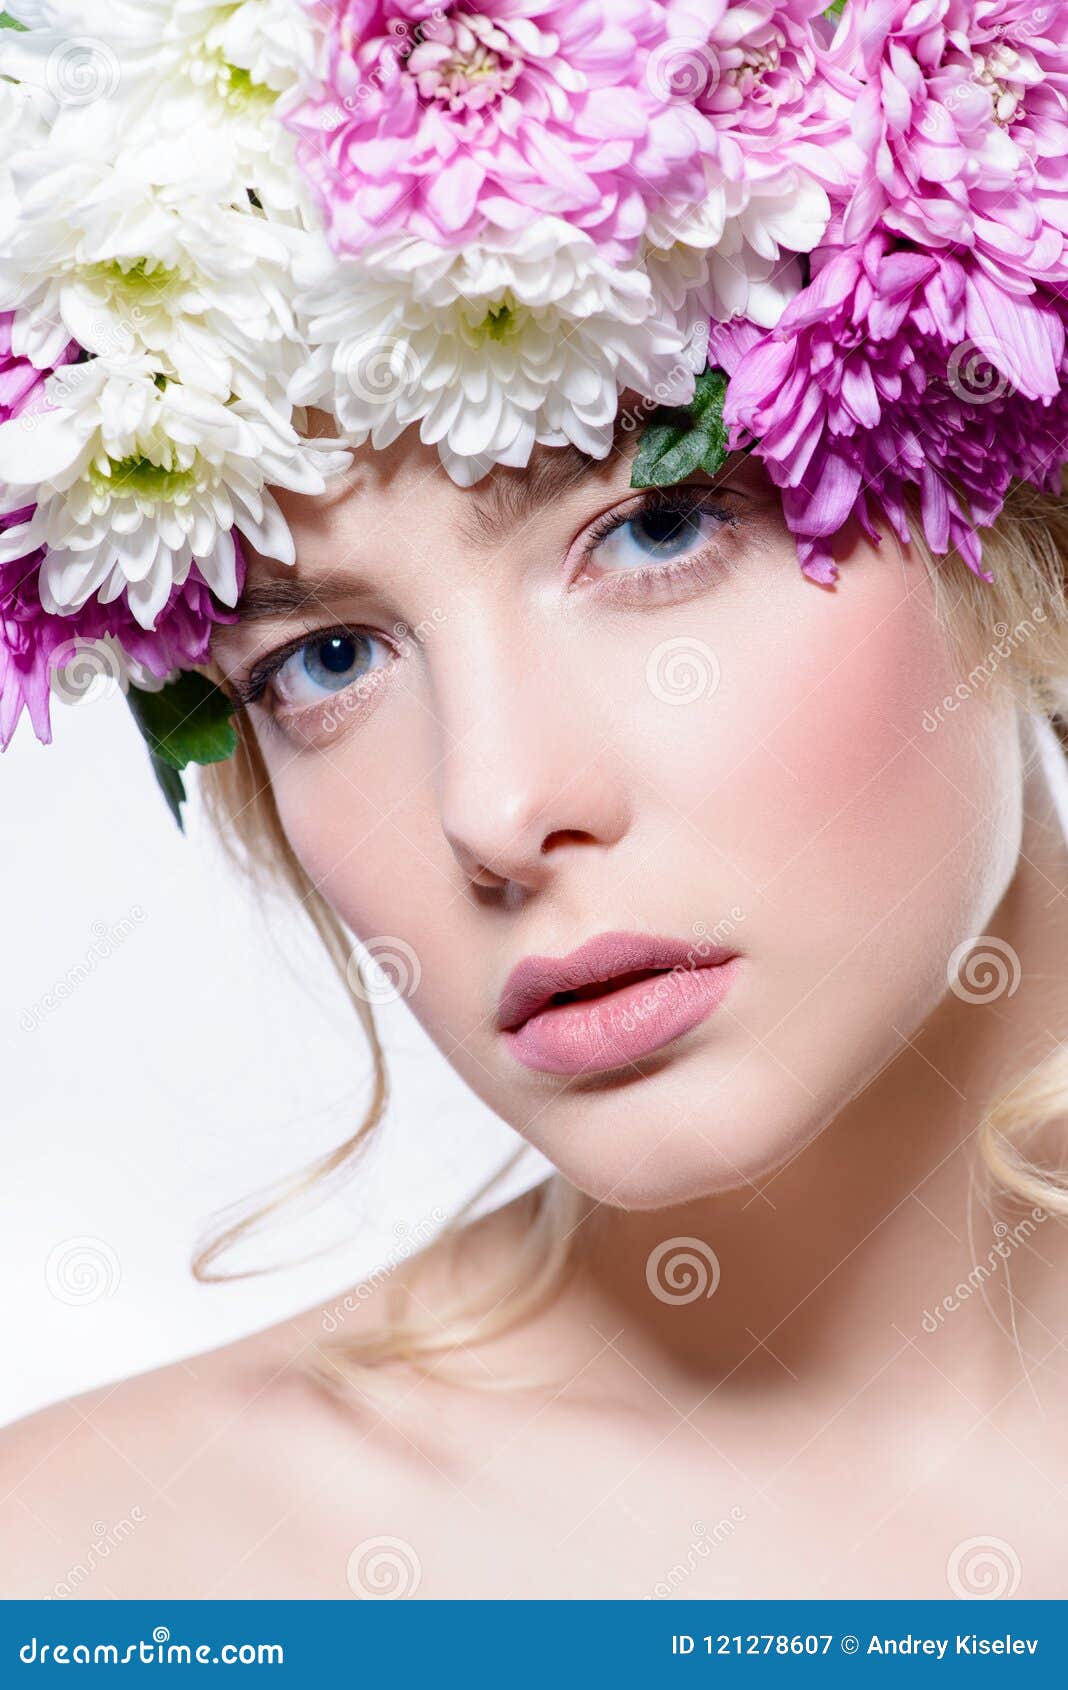 Floral wreath on head stock image. Image of cosmetics - 121278607